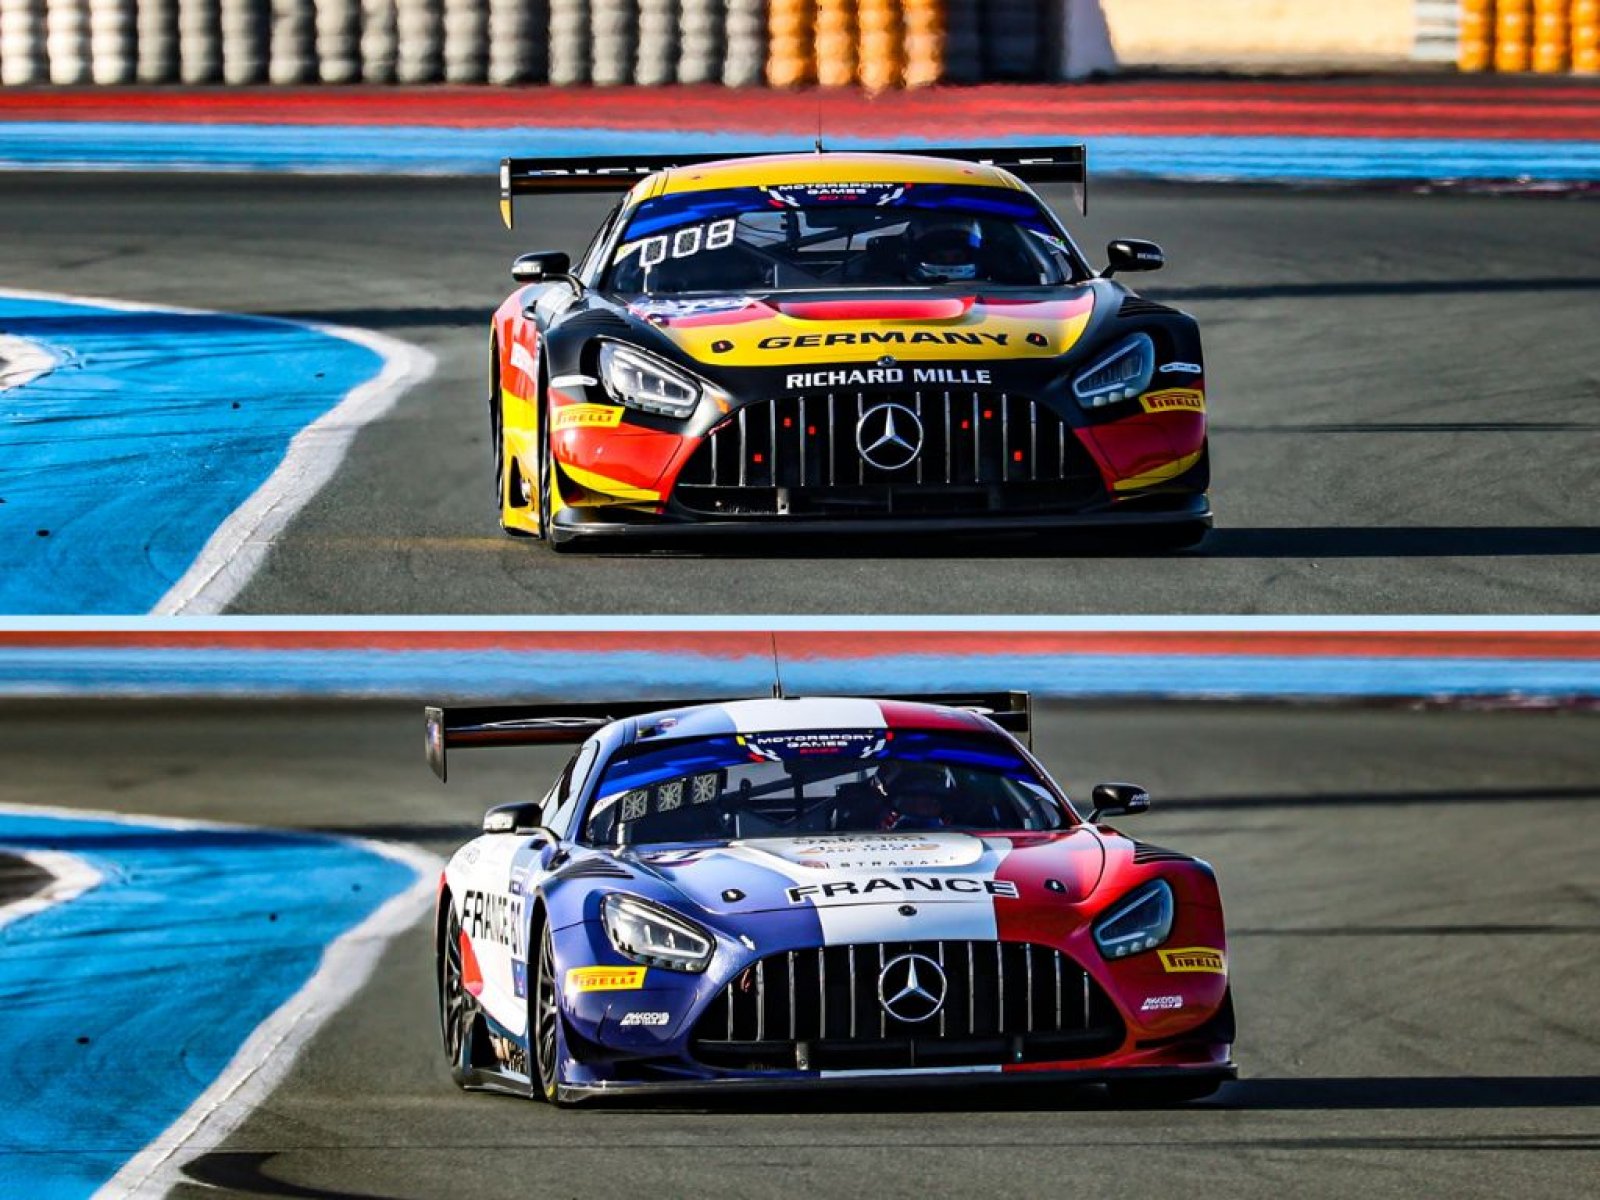 GT: Germany and France share poles for qualifying races